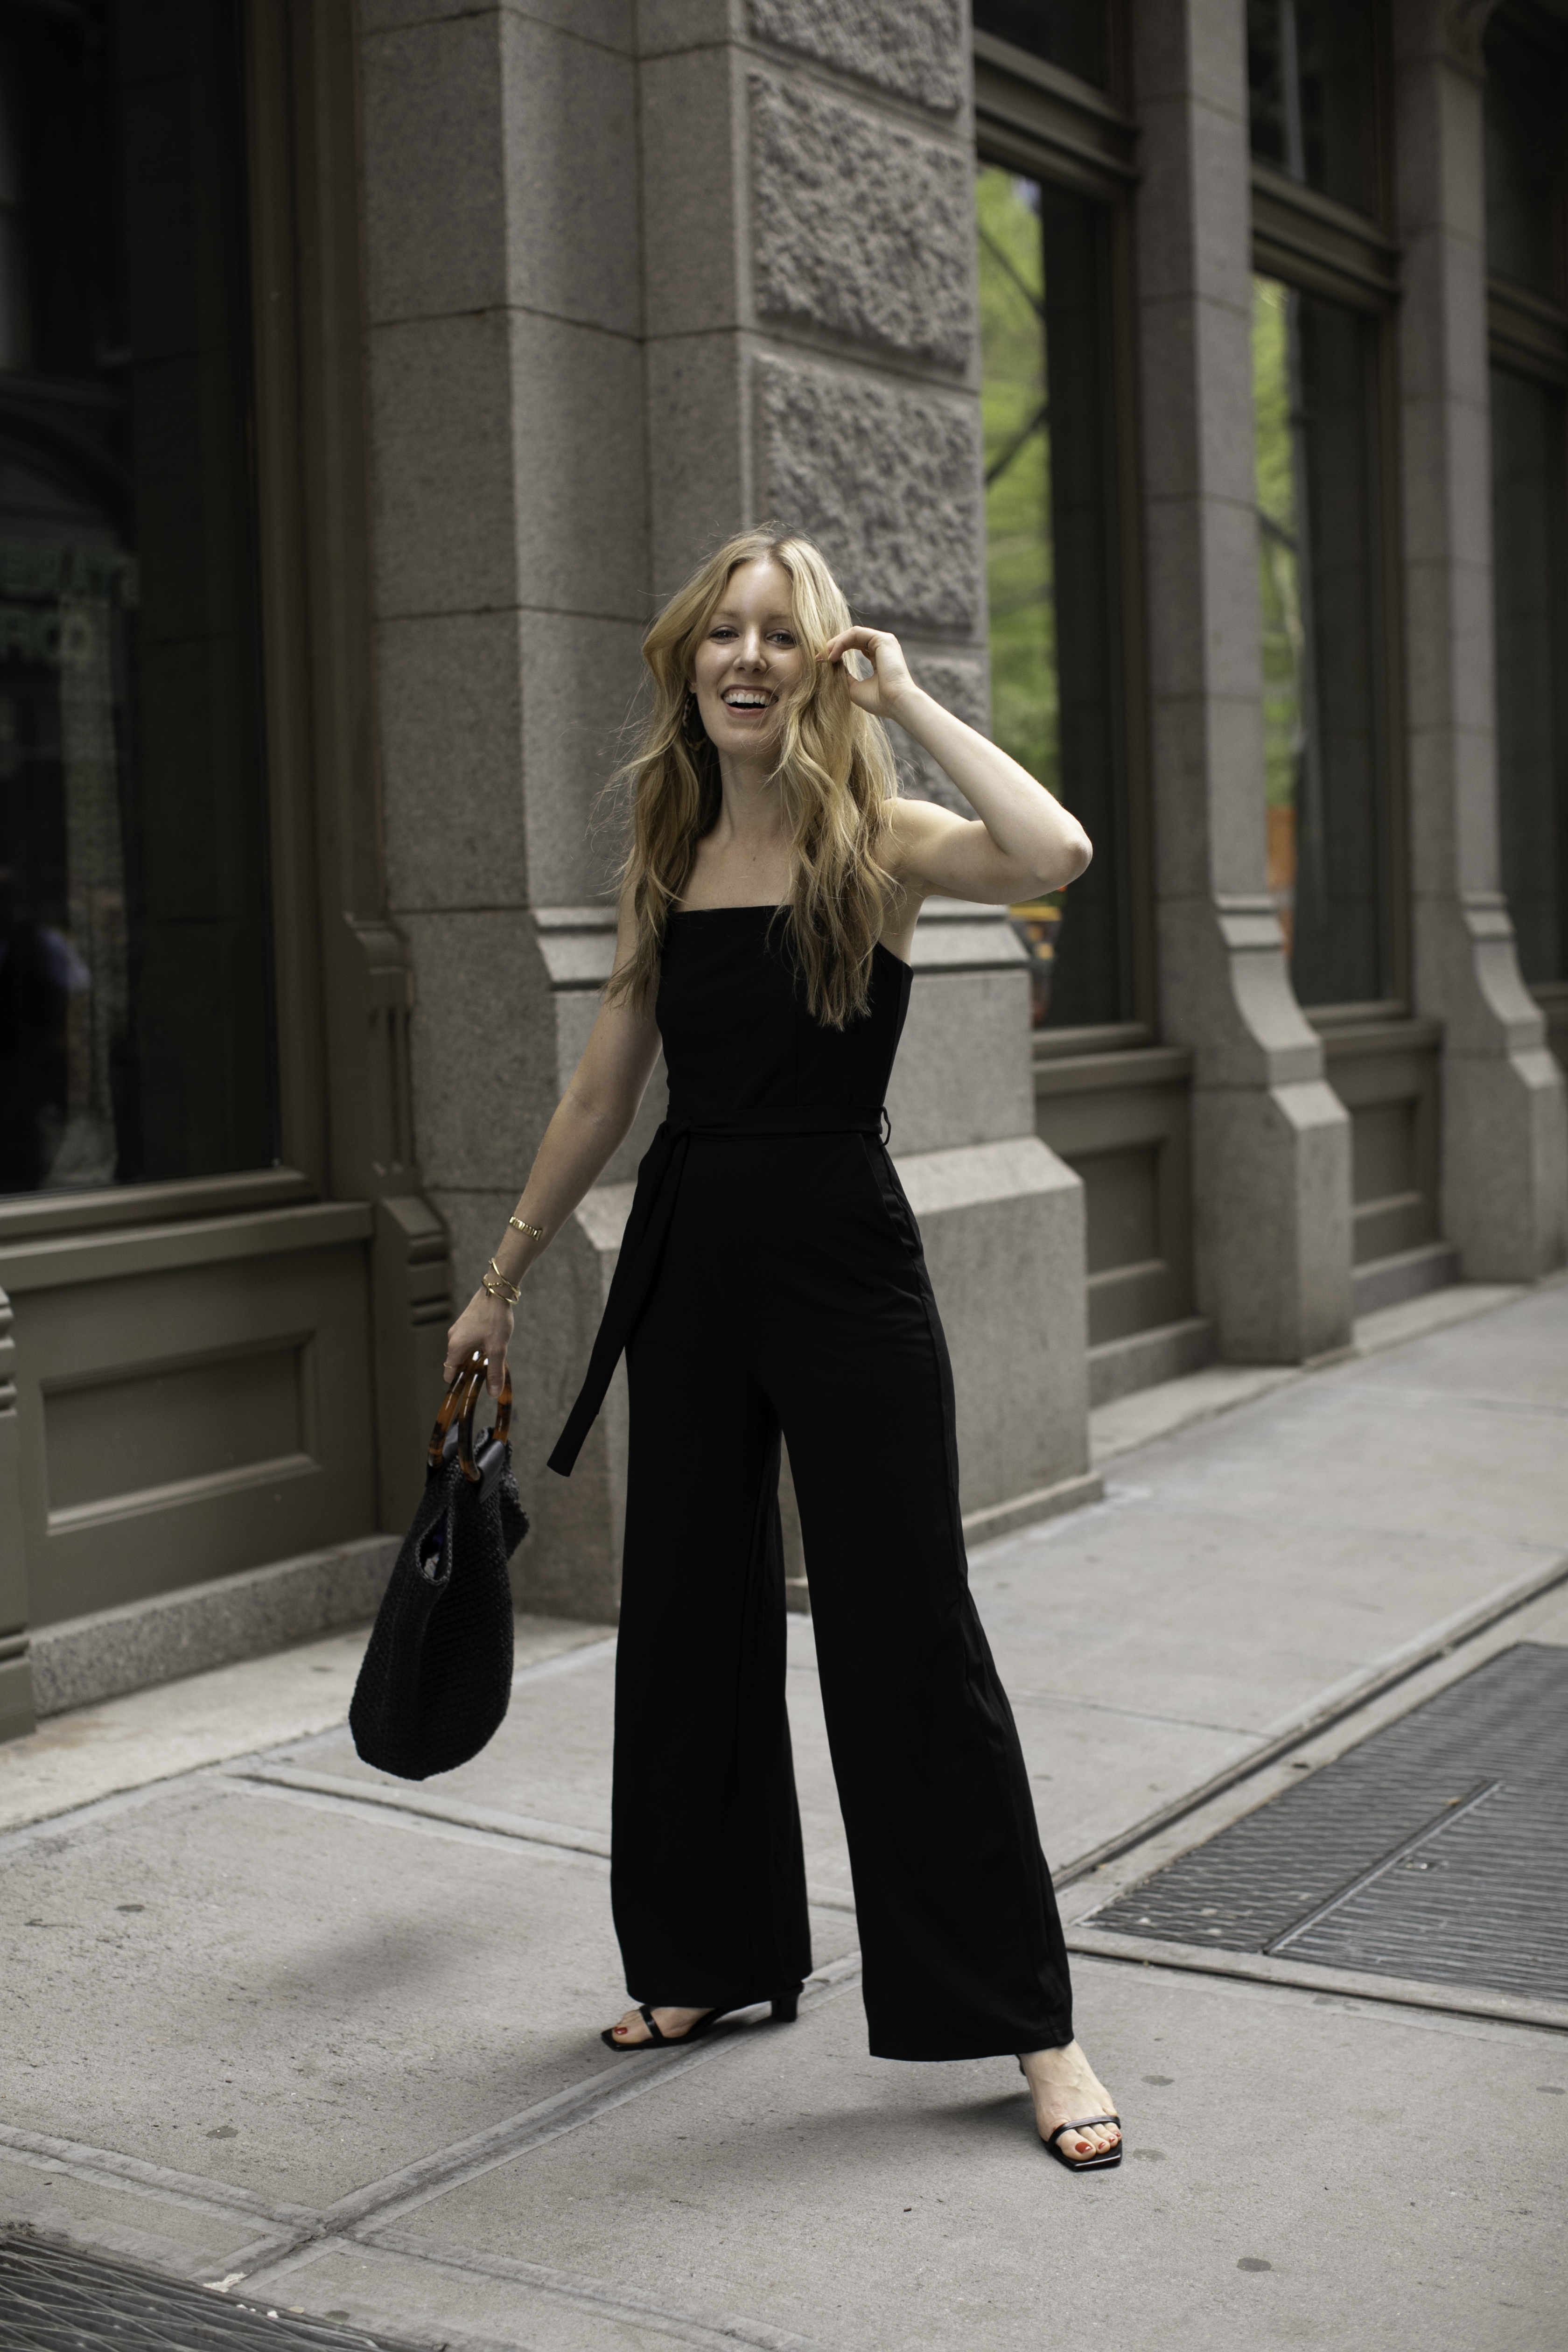 How To Look Chic In The Heat - The New York Stylist